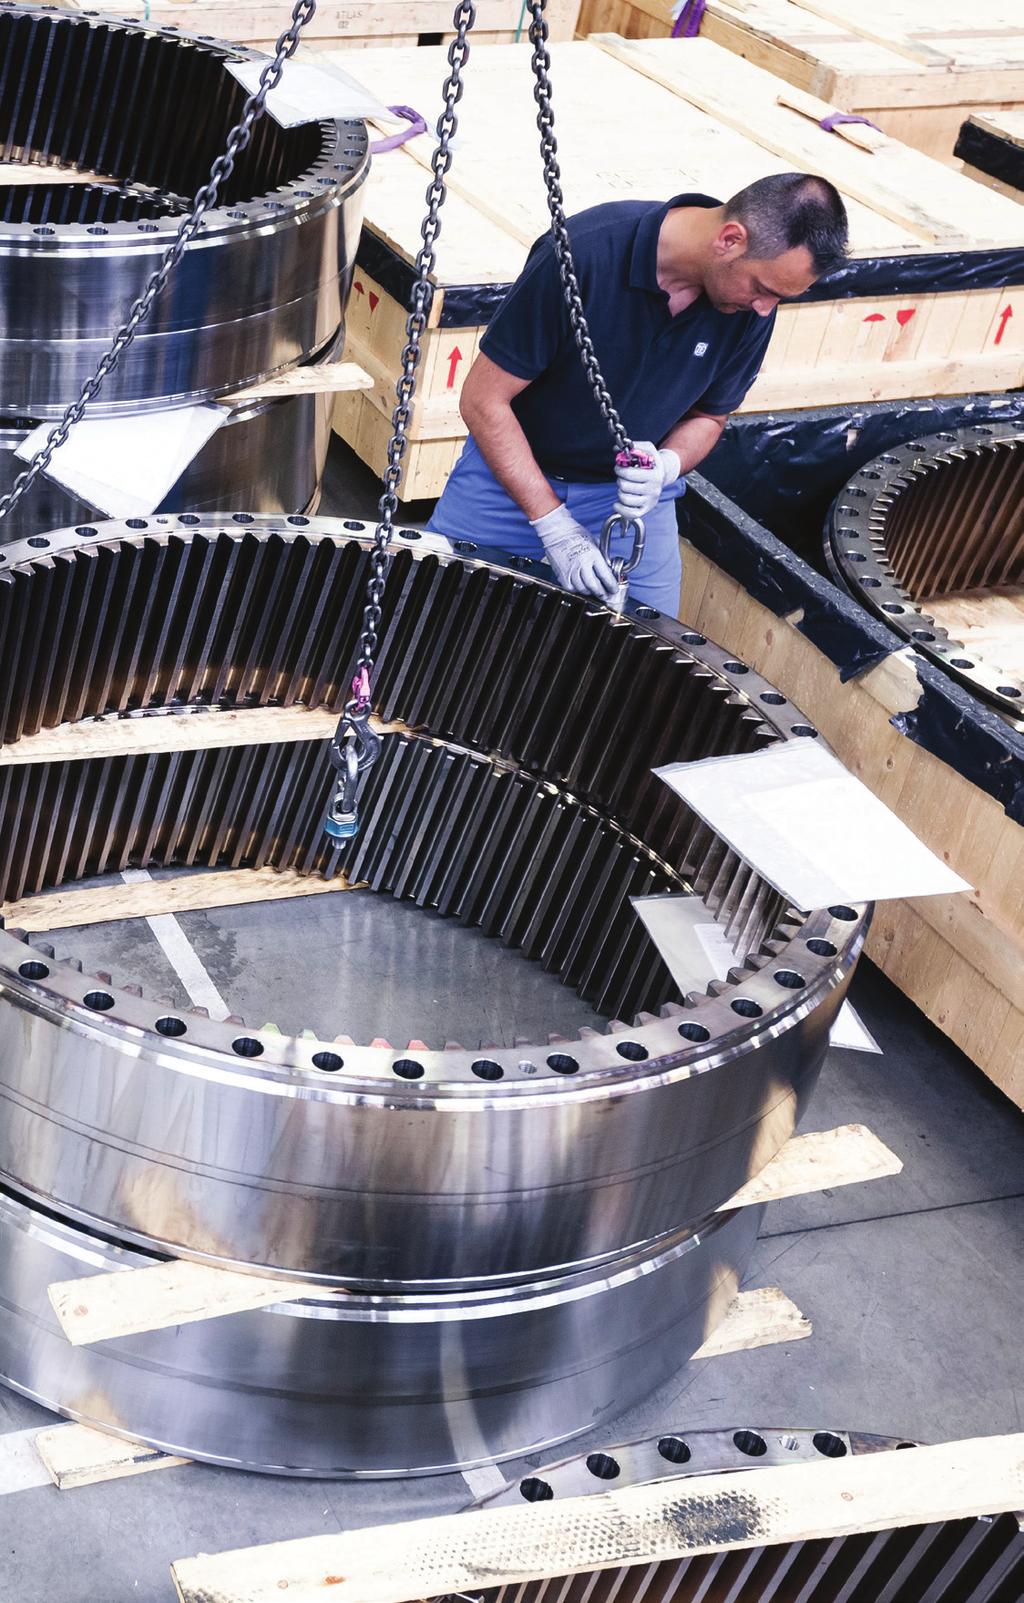 As wind turbine manufacturers search for high flexibility for their new generation turbine developments, ZF has developed a new concept, helping customers reduce the cost of wind energy, and